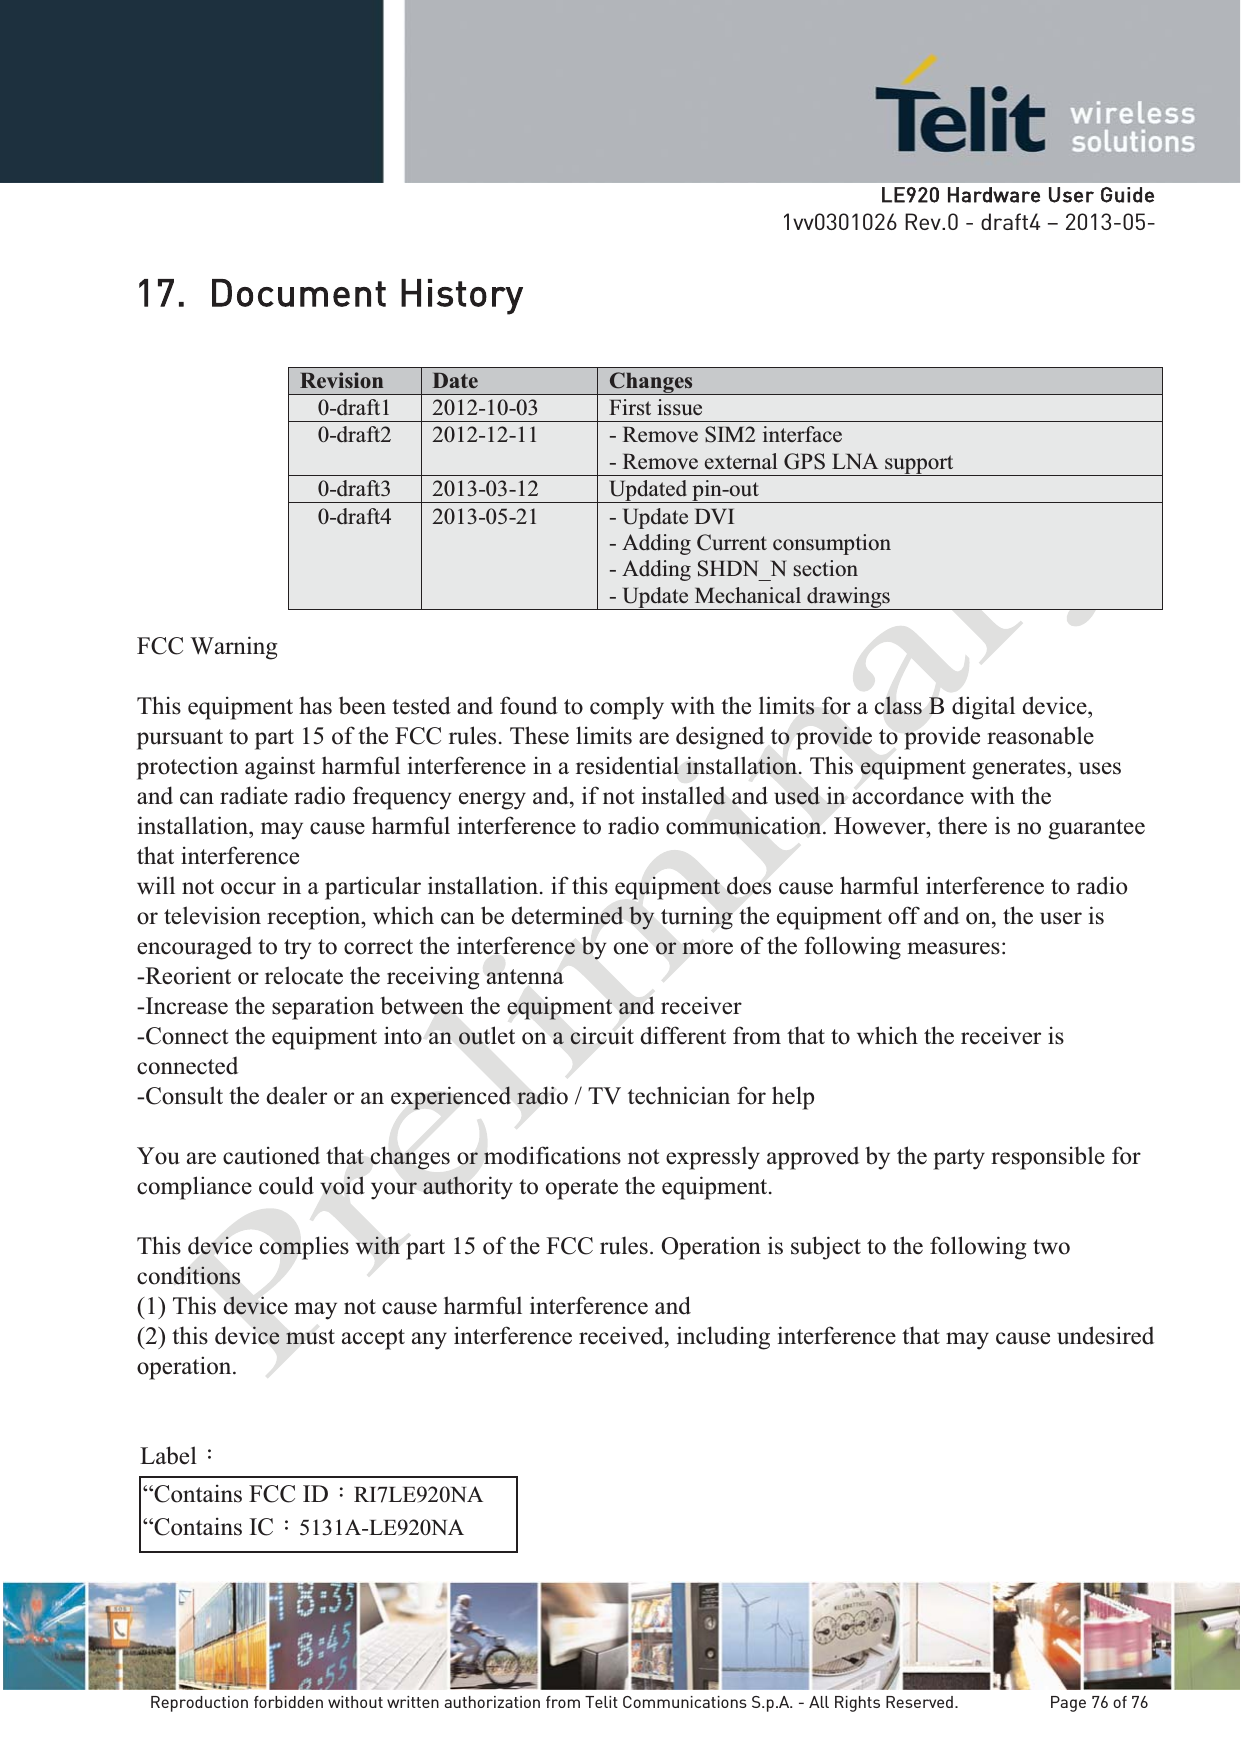   LLE920 Hardware User Guide1vv0301026 Rev.0 - draft4 – 2013-05-Reproduction forbidden without written authorization from Telit Communications S.p.A. - All Rights Reserved.    Page 76 of 76 17. Document History Revision  Date  Changes 0-draft1  2012-10-03  First issue  0-draft2  2012-12-11  - Remove SIM2 interface - Remove external GPS LNA support0-draft3  2013-03-12  Updated pin-out  0-draft4 2013-05-21 - Update DVI - Adding Current consumption- Adding SHDN_N section - Update Mechanical drawings FCC Warning  This equipment has been tested and found to comply with the limits for a class B digital device, pursuant to part 15 of the FCC rules. These limits are designed to provide to provide reasonable protection against harmful interference in a residential installation. This equipment generates, uses and can radiate radio frequency energy and, if not installed and used in accordance with the installation, may cause harmful interference to radio communication. However, there is no guarantee that interference will not occur in a particular installation. if this equipment does cause harmful interference to radio or television reception, which can be determined by turning the equipment off and on, the user is encouraged to try to correct the interference by one or more of the following measures: -Reorient or relocate the receiving antenna -Increase the separation between the equipment and receiver -Connect the equipment into an outlet on a circuit different from that to which the receiver is connected -Consult the dealer or an experienced radio / TV technician for help  You are cautioned that changes or modifications not expressly approved by the party responsible for compliance could void your authority to operate the equipment.  This device complies with part 15 of the FCC rules. Operation is subject to the following two conditions (1) This device may not cause harmful interference and  (2) this device must accept any interference received, including interference that may cause undesired operation.  “Contains FCC ID：RI7LE920NA “Contains IC：5131A-LE920NA Label：